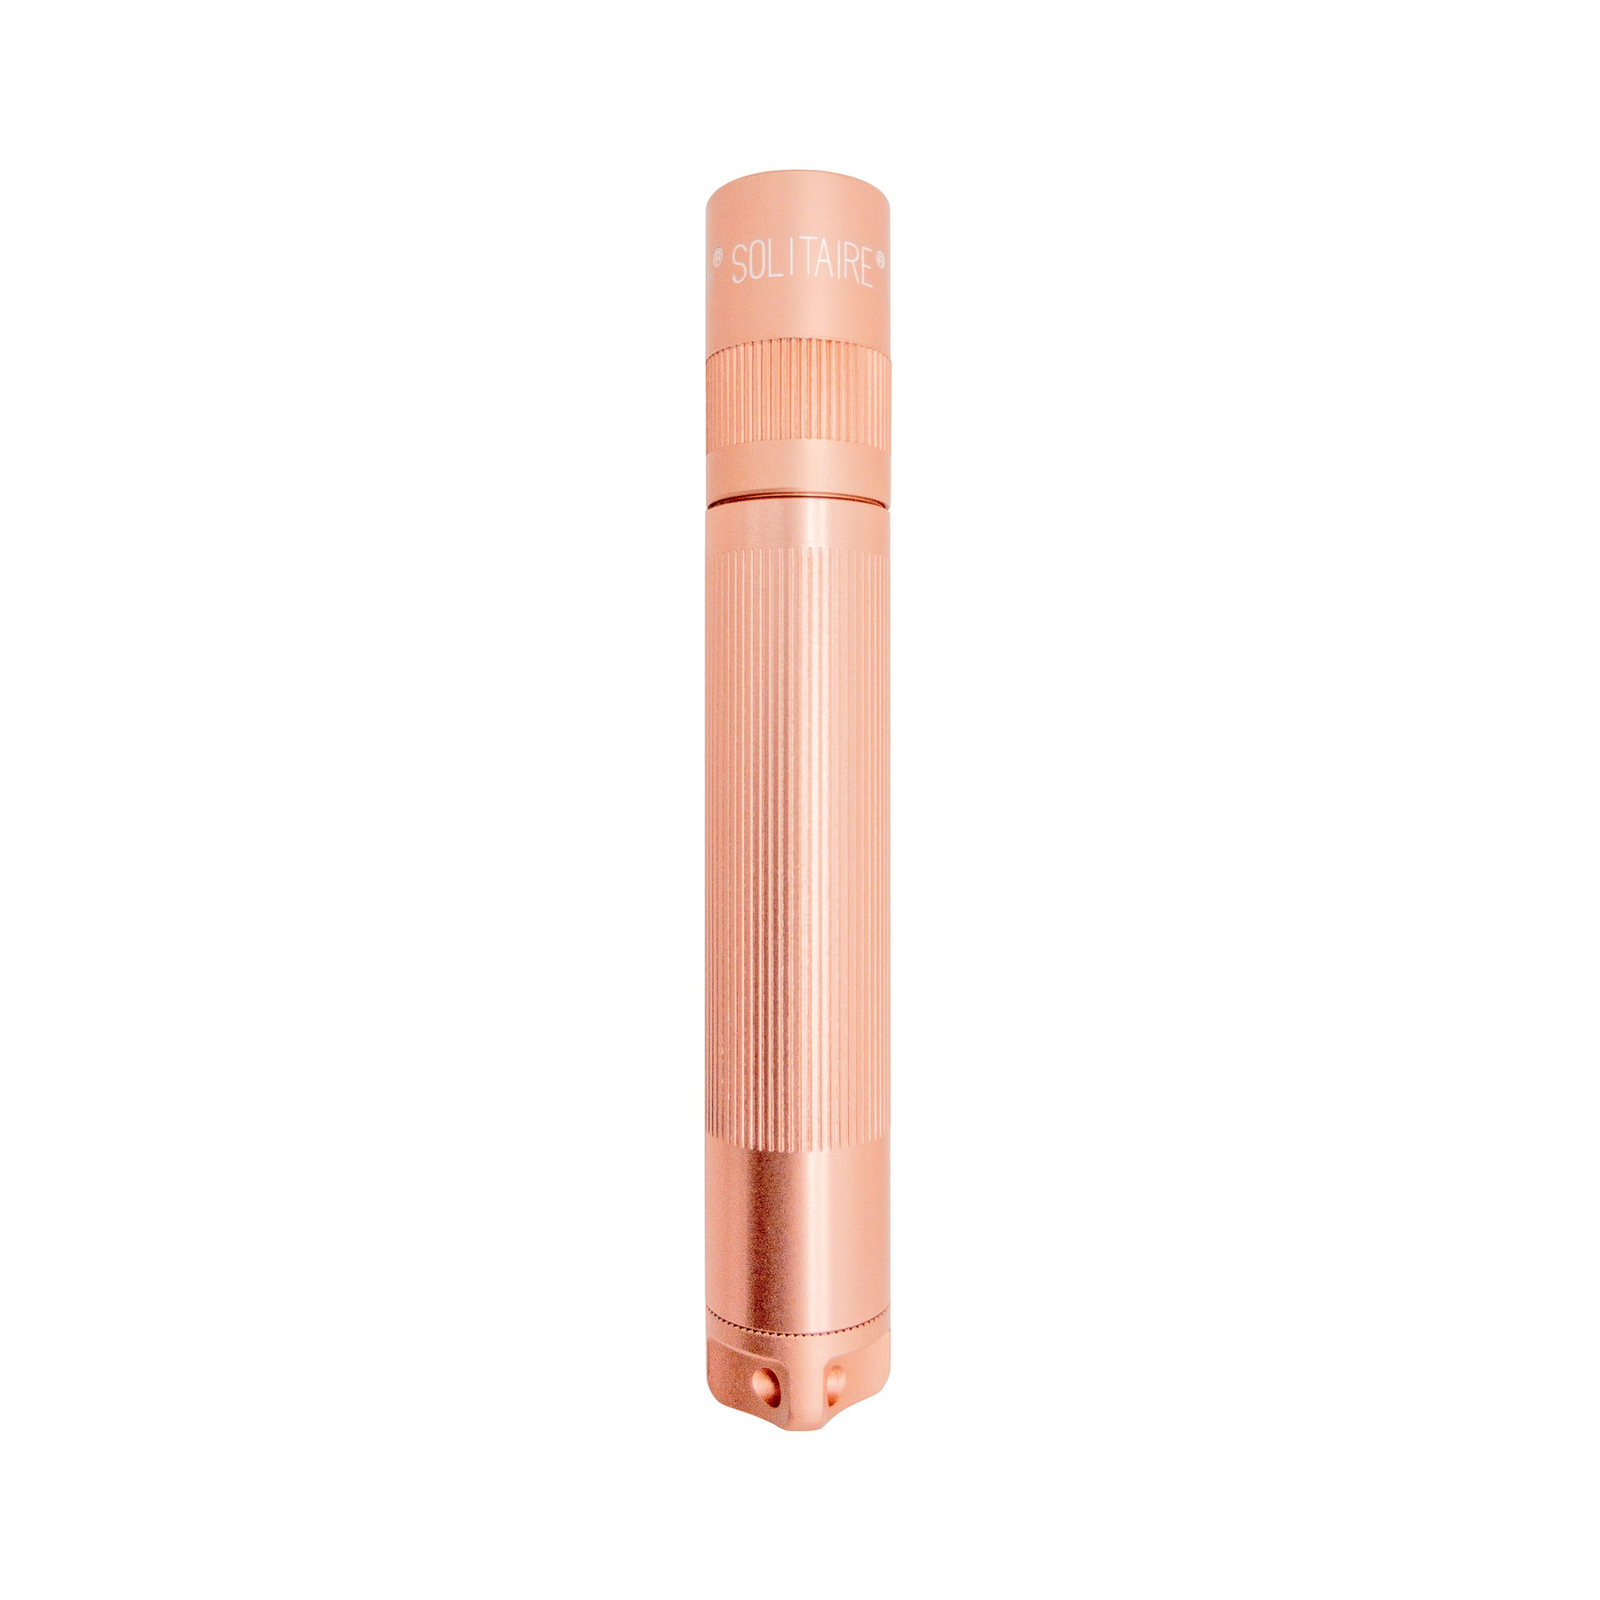 Maglite LED-Taschenlampe Solitaire, 1-Cell AAA, Box, rosé